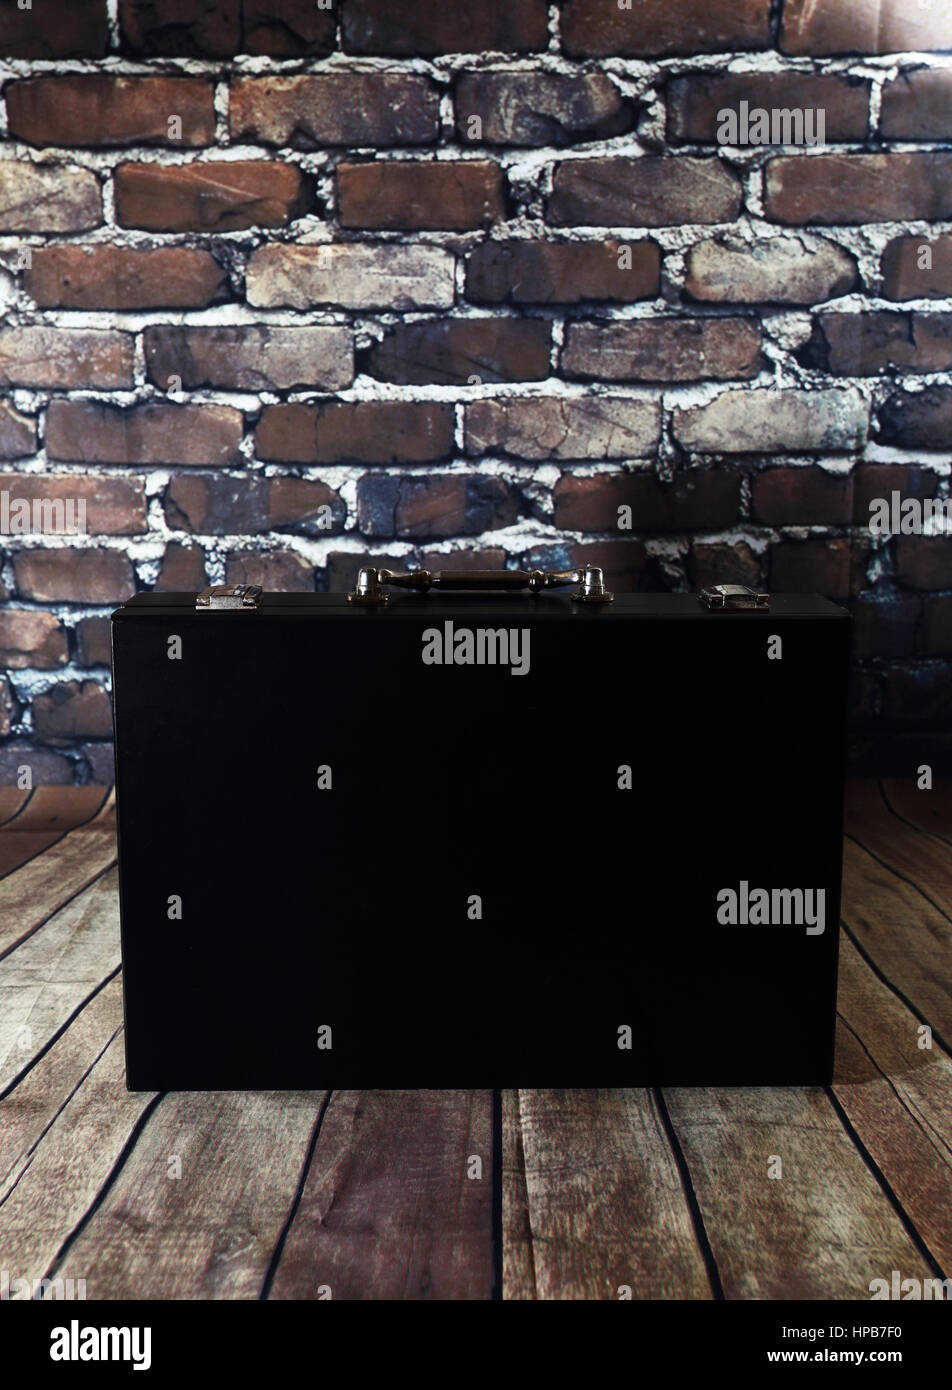 Black suitcase on brick wall background. Black case on wooden floor. Small suitcase for business papers Stock Photo